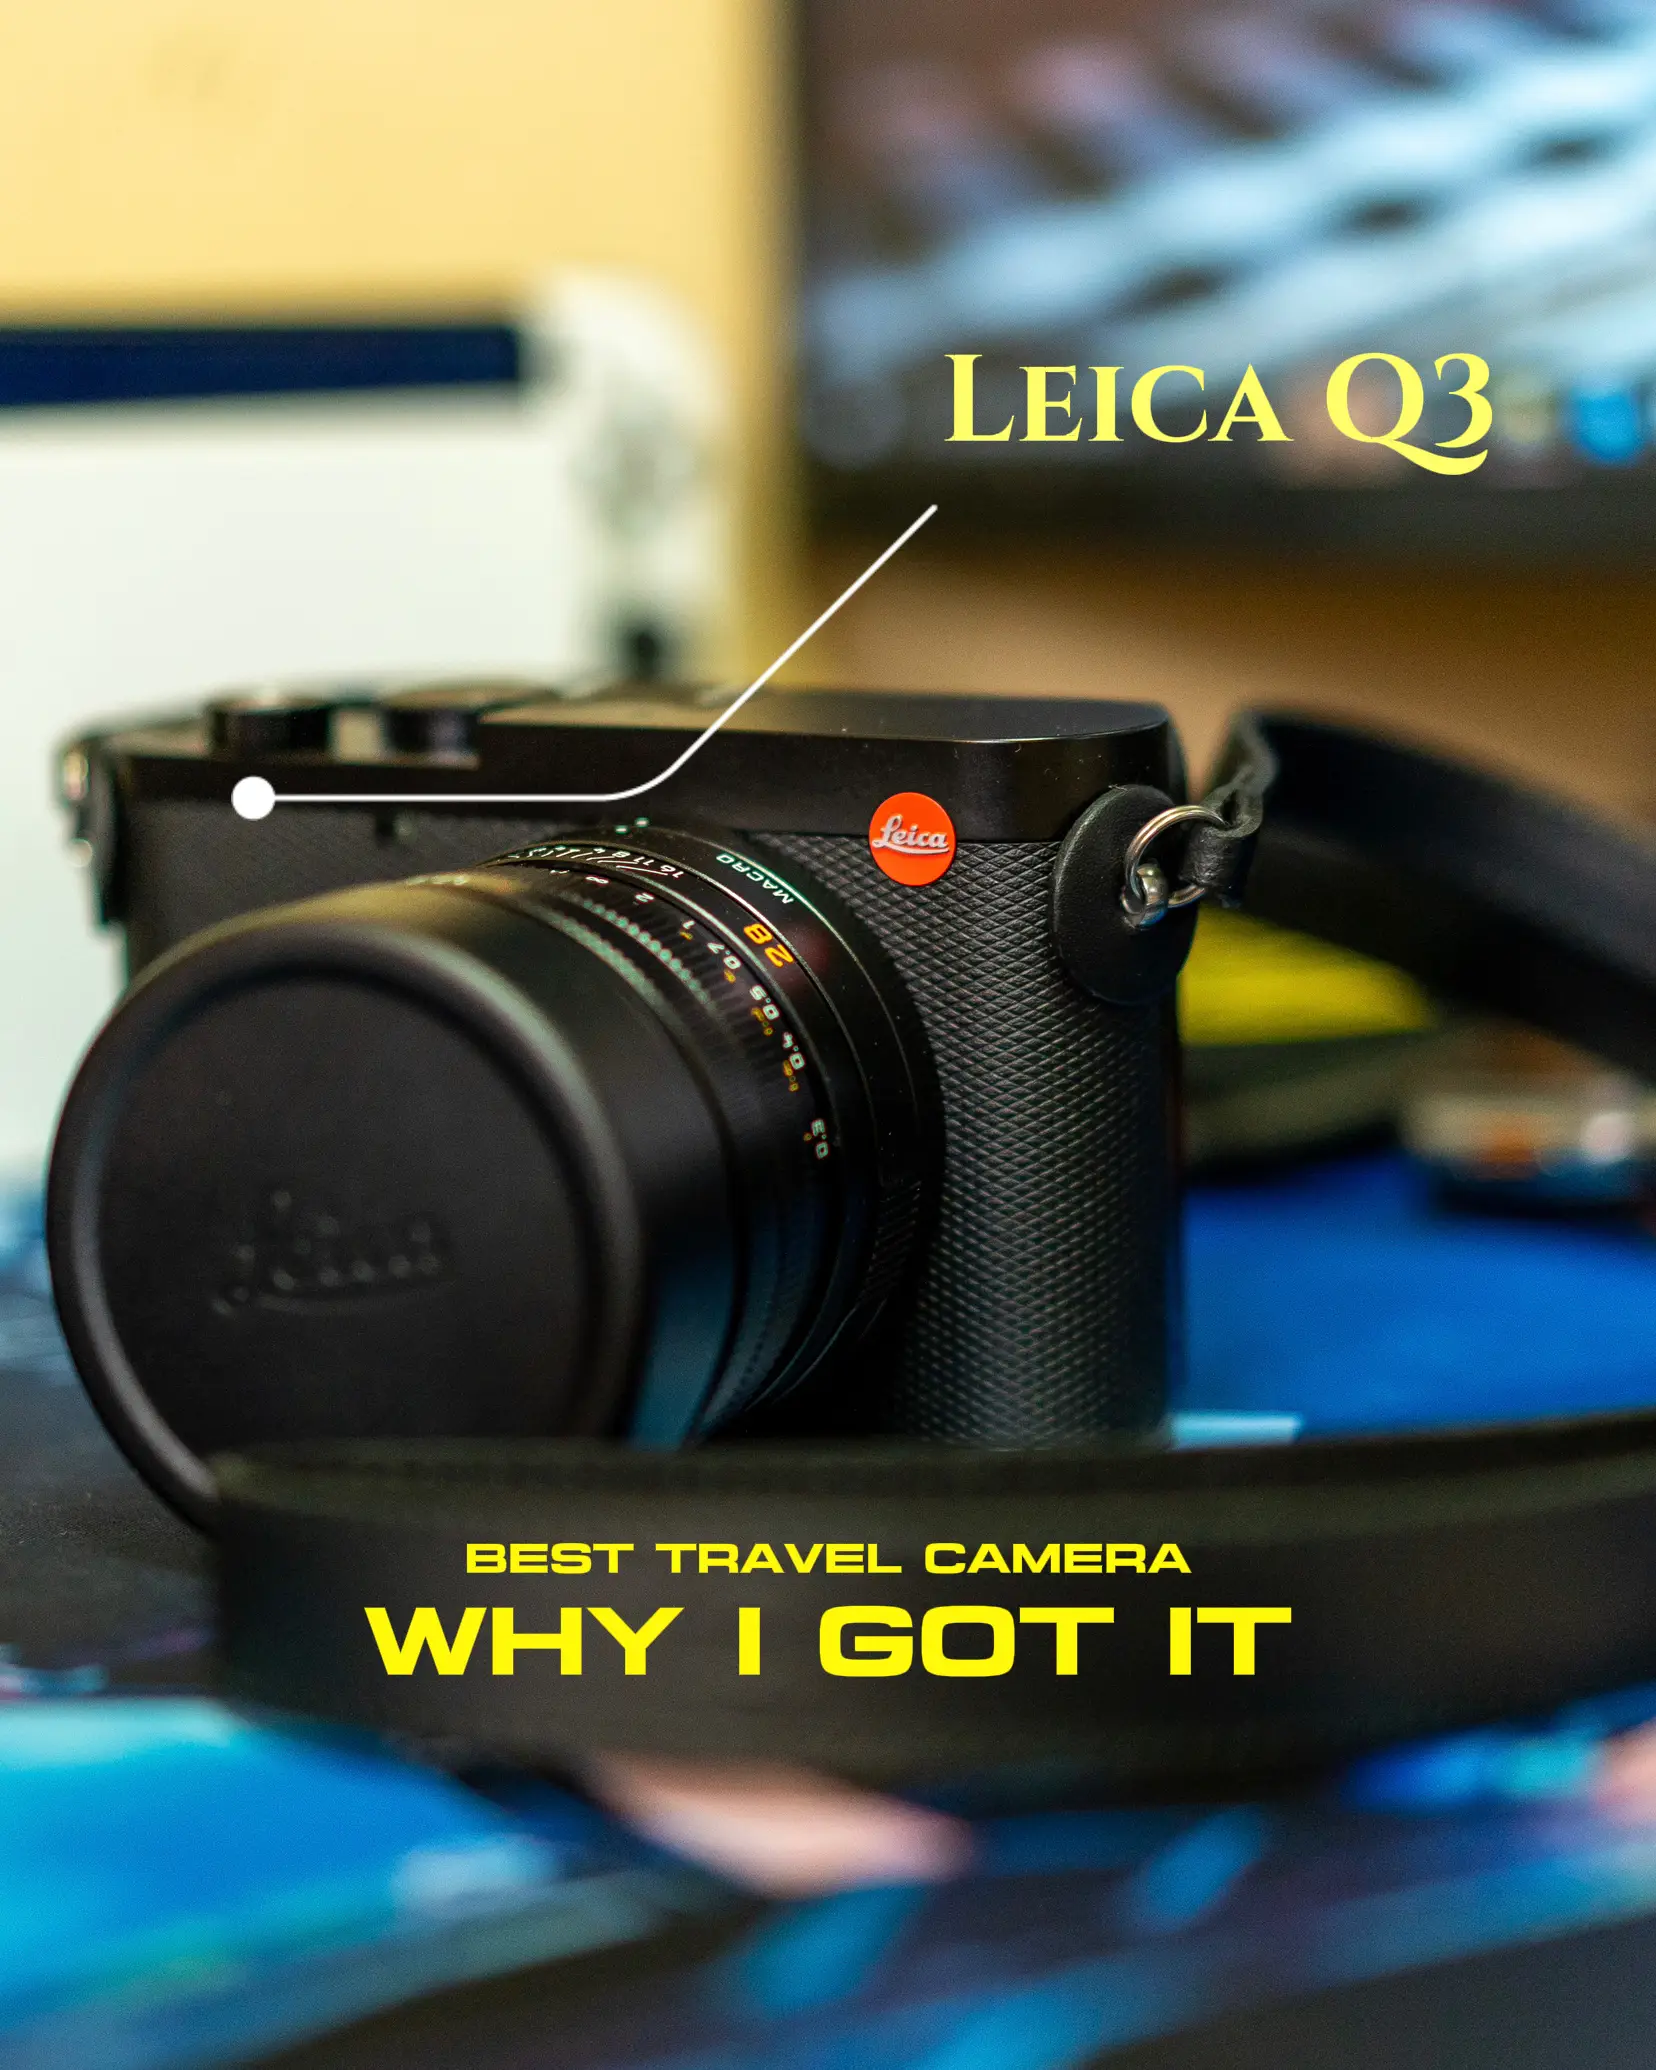 The Leica Q3 is here – and it's definitely the Leica I'd buy if I